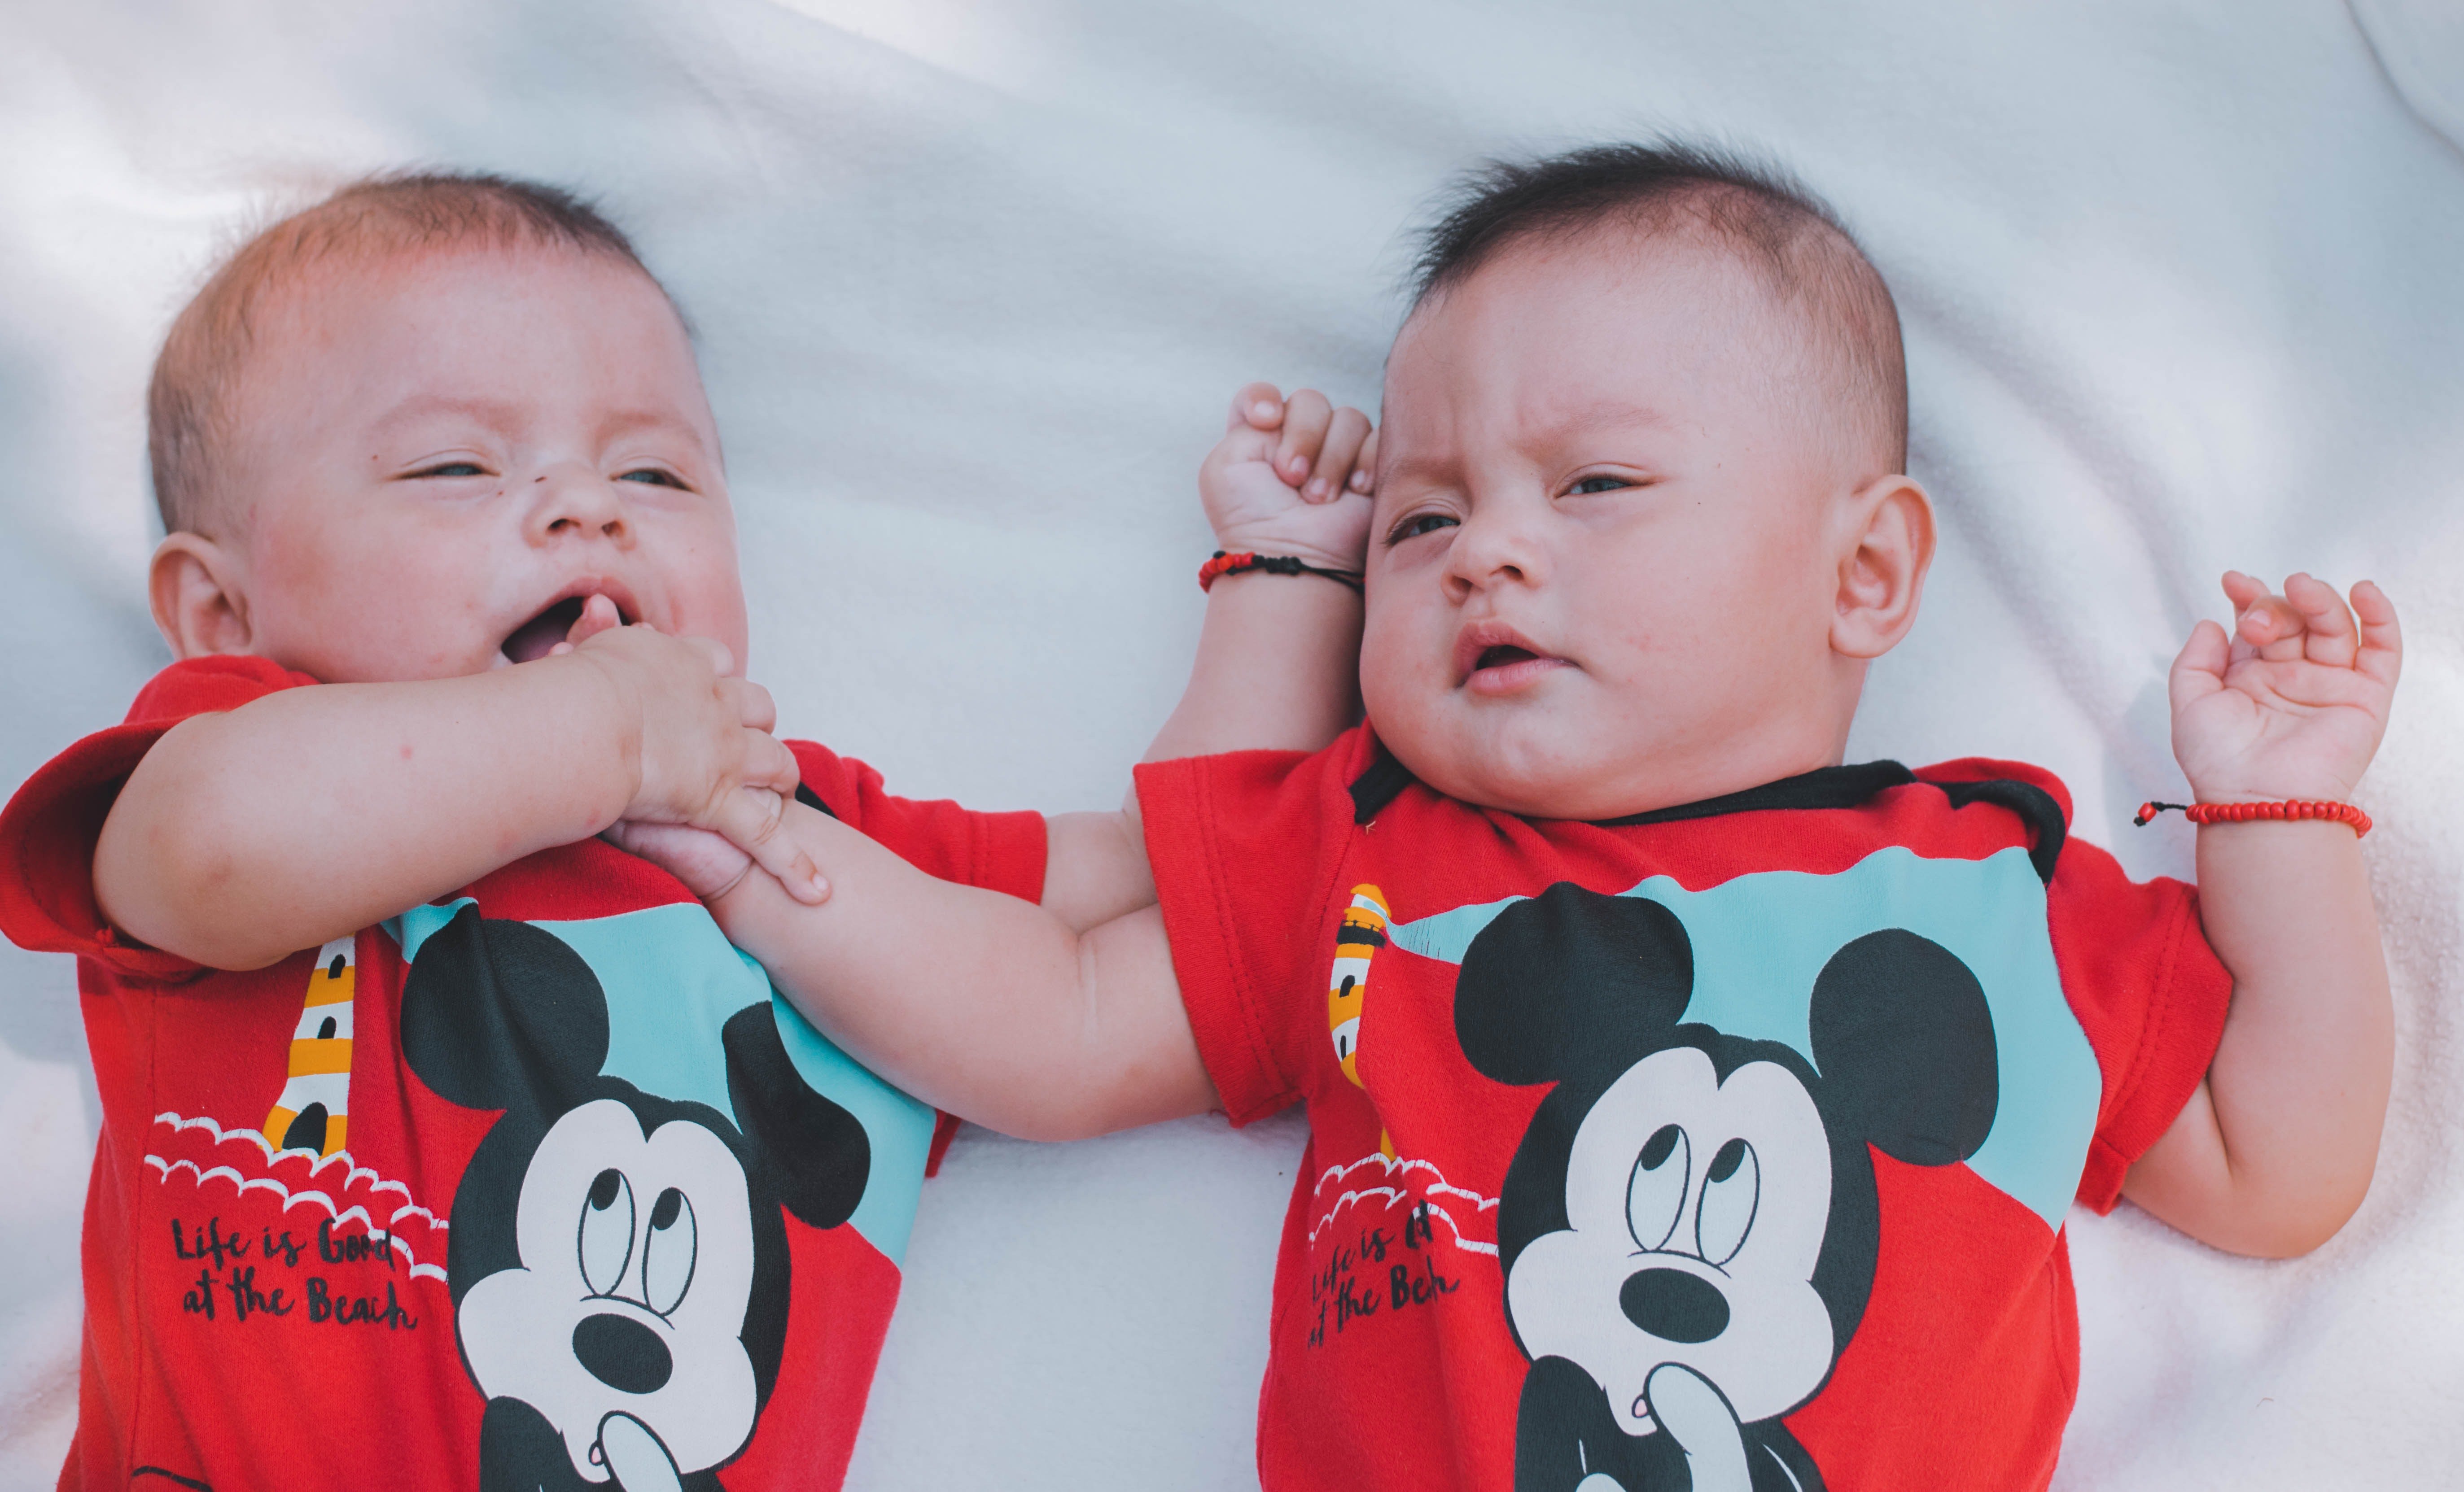 Jack and Chandler were abandoned by their mom when they were babies. |  Source: Pexels